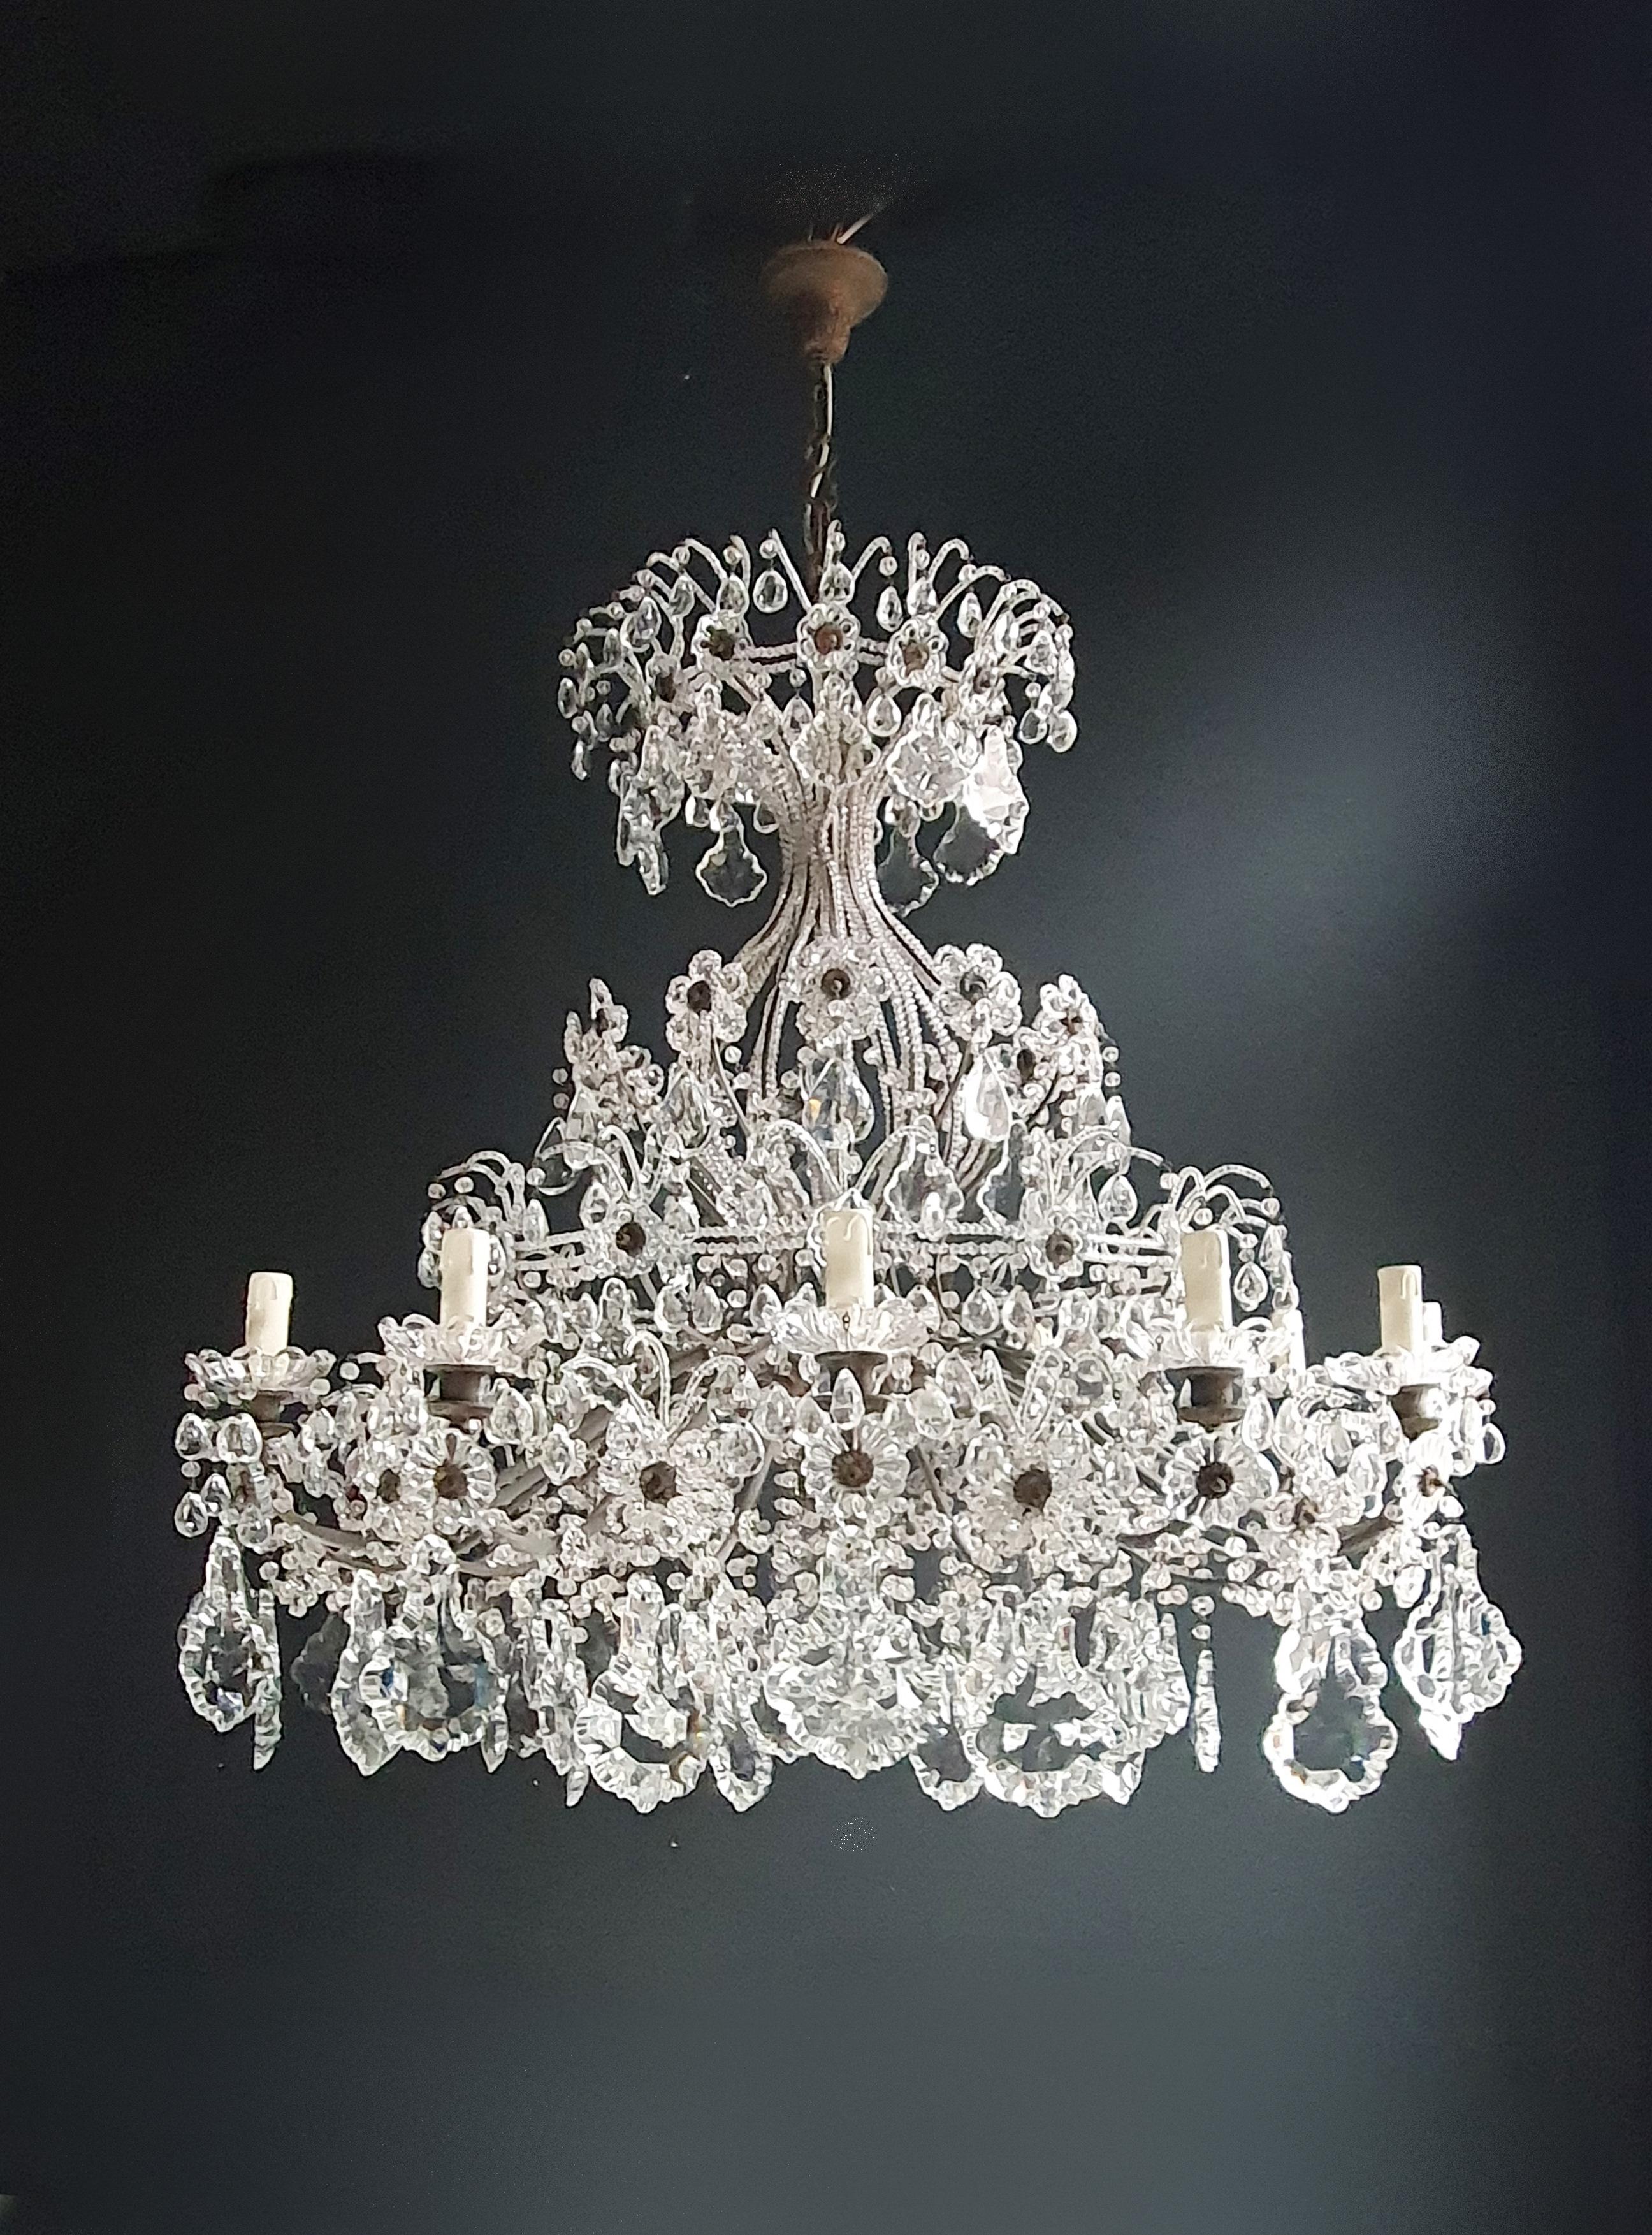 An antique chandelier, lovingly and professionally restored in Berlin, now holds a new lease on life. Its electrical wiring has been meticulously adjusted to comply with US standards, ensuring its seamless operation across different regions. It has